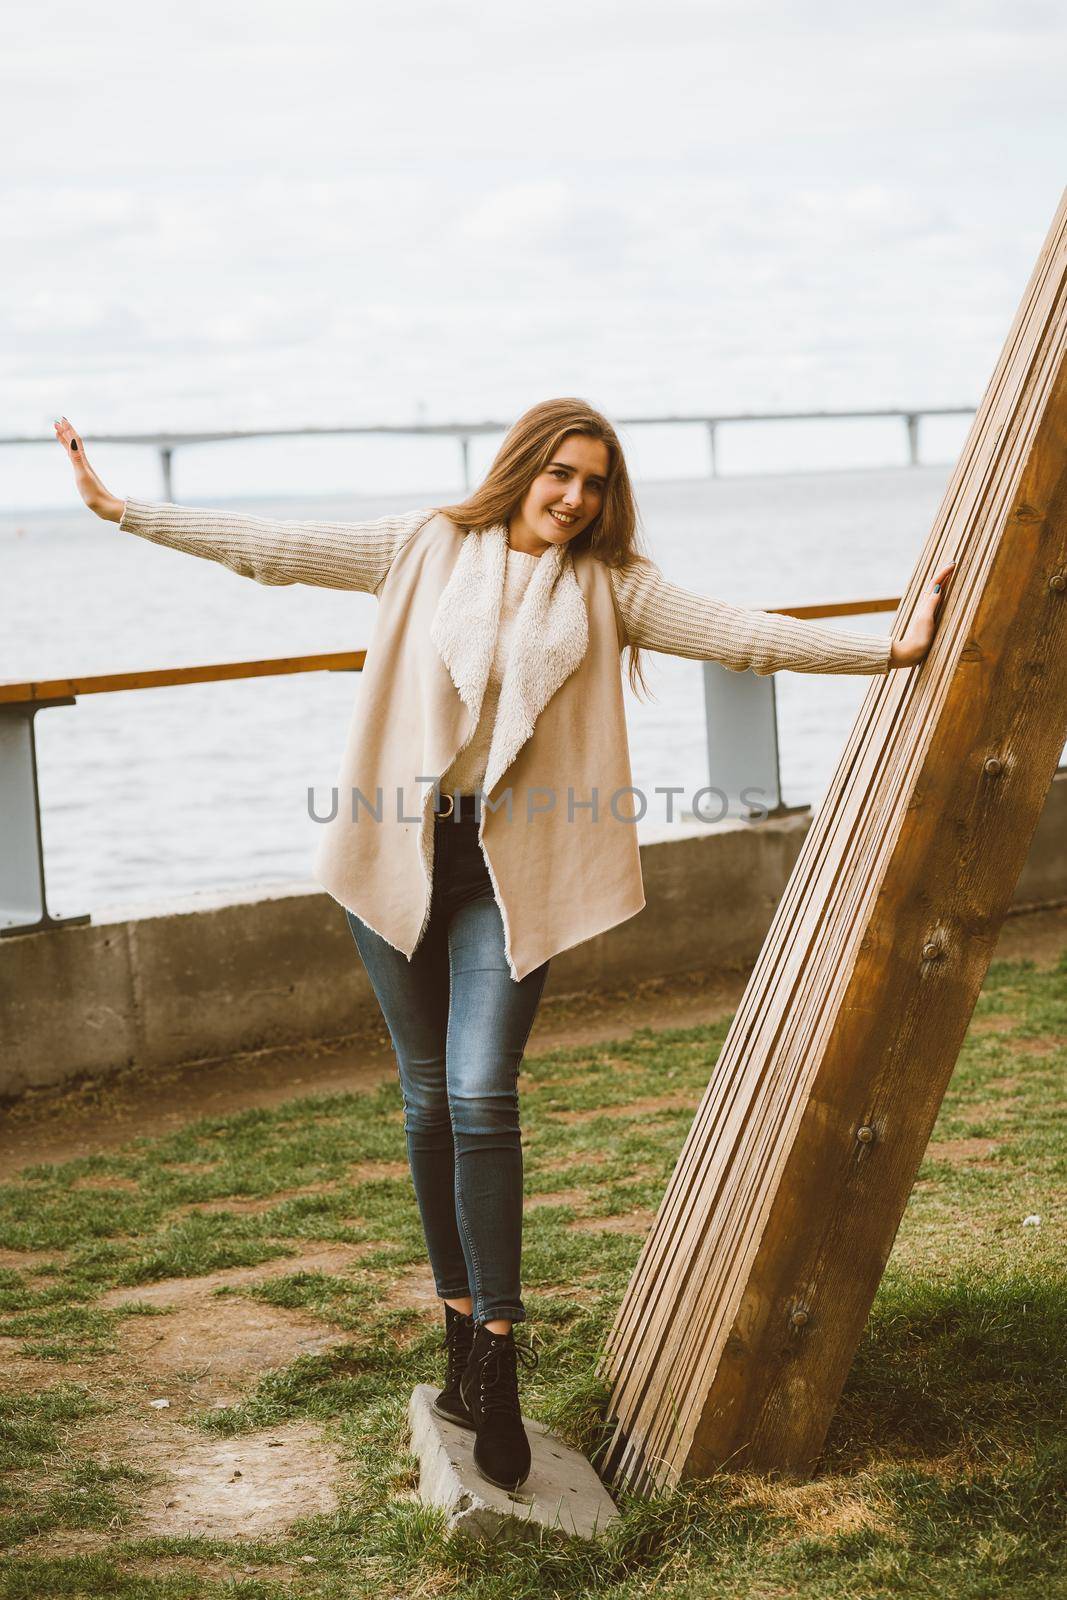 Happy young girl standing on the waterfront at pier in port, enjoying life and waving his arms. Woman with long hair smiles and enjoys moment, vertical